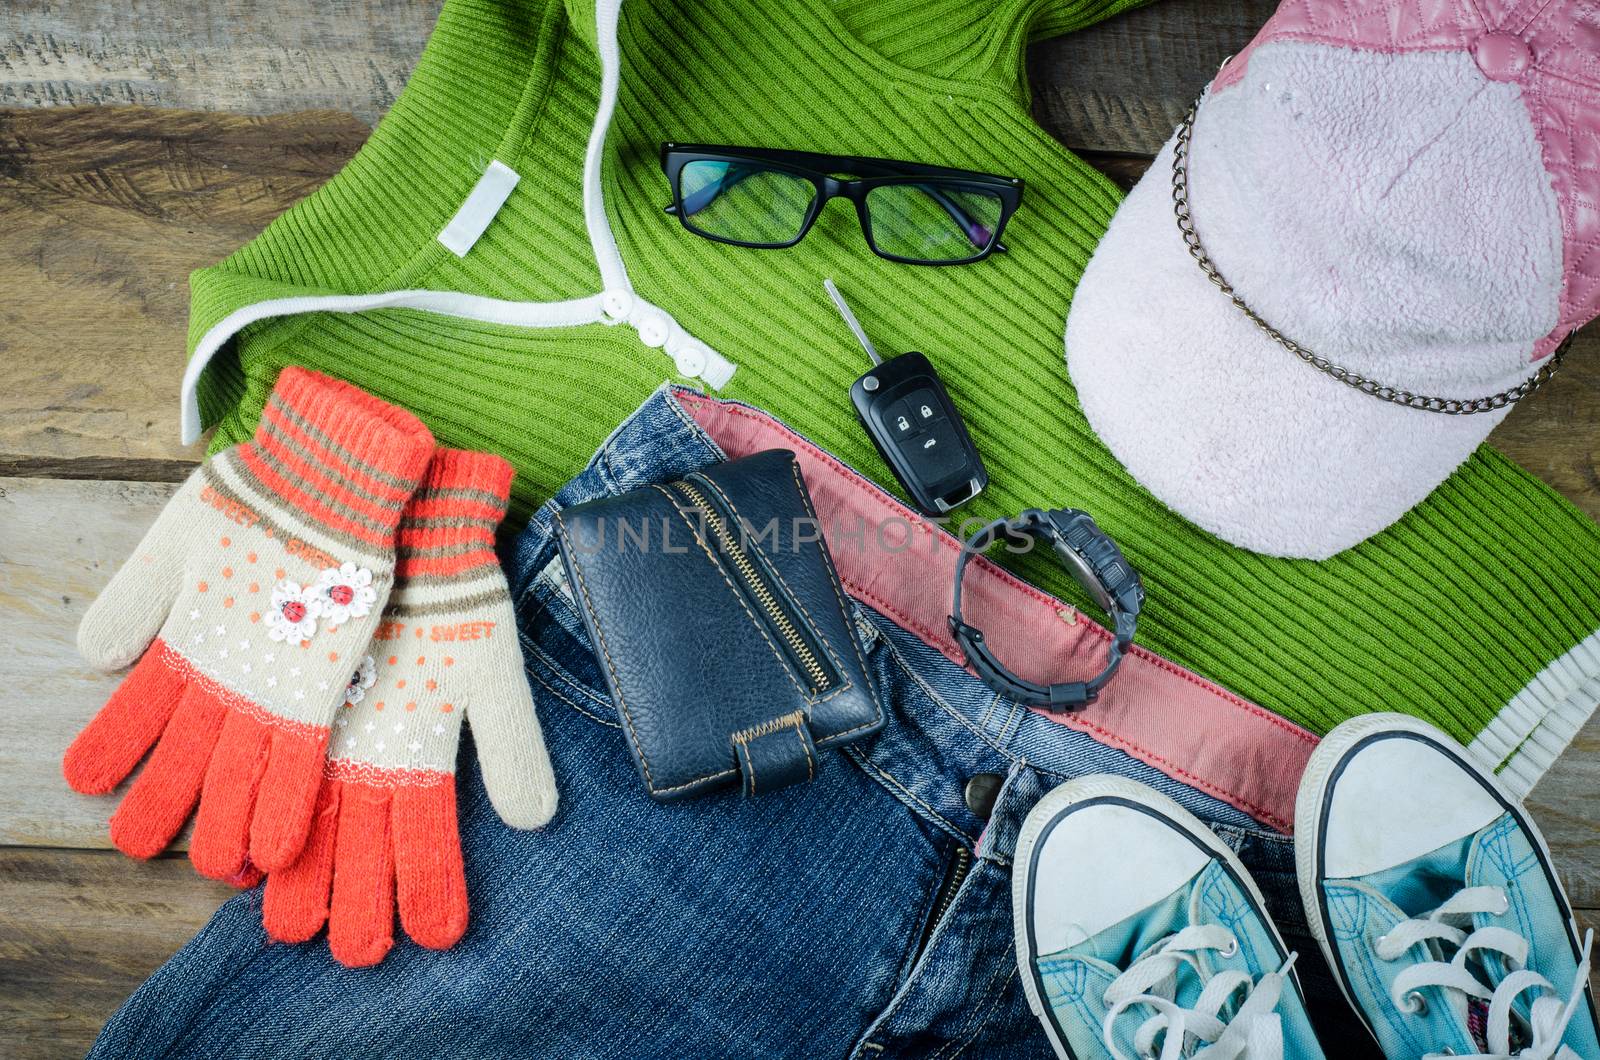 Travel accessories, clothes Wallet, glasses, phone headset, shoes hat, Ready for travel by photobyphotoboy